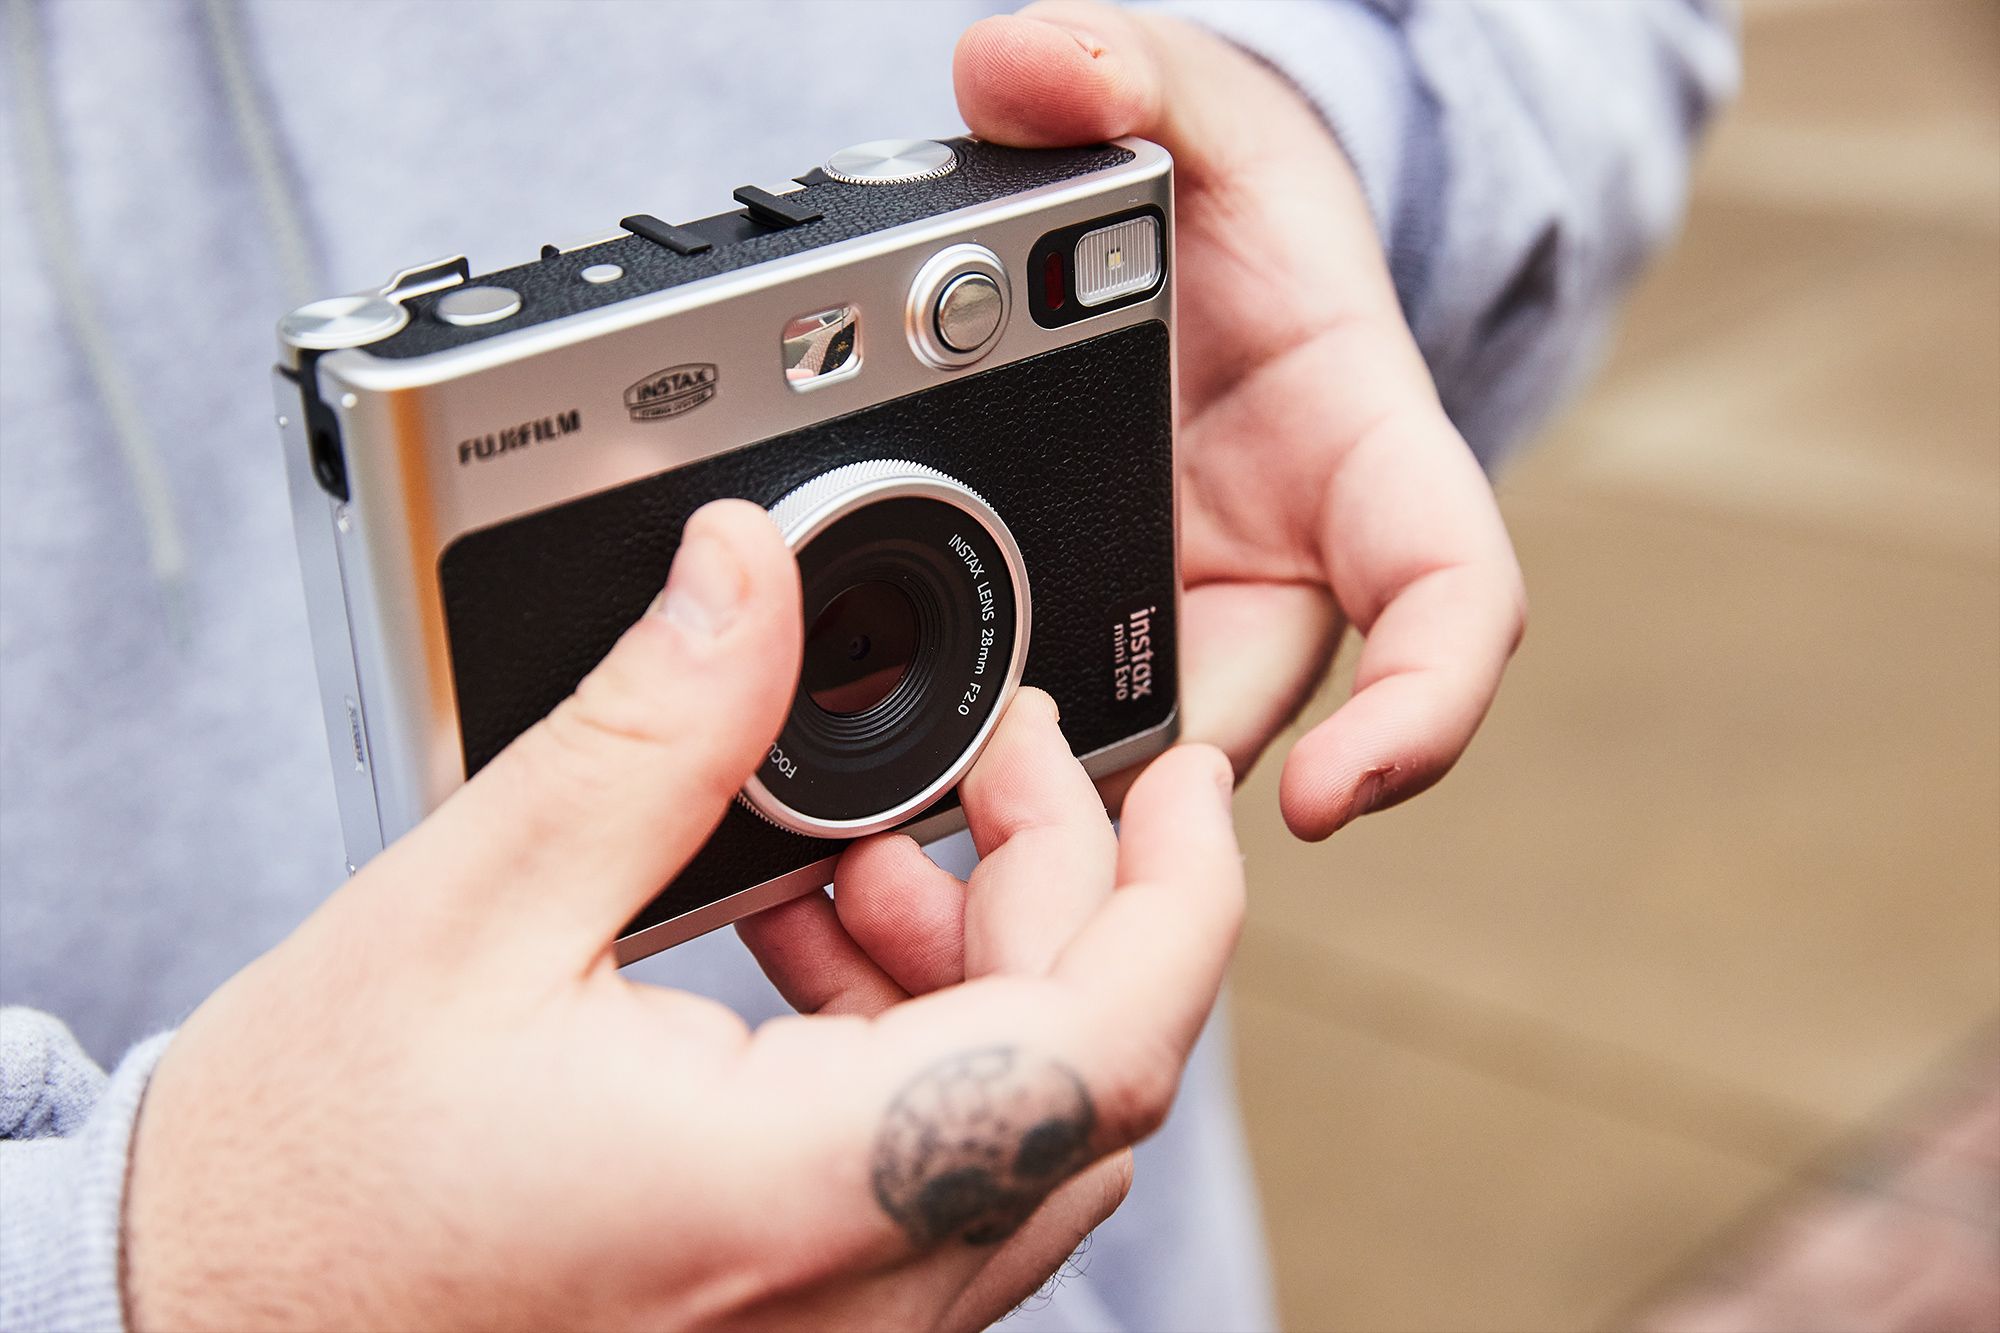 Hands-on: The Fuji Instax Mini Evo instant camera is as fun as it is  impractical